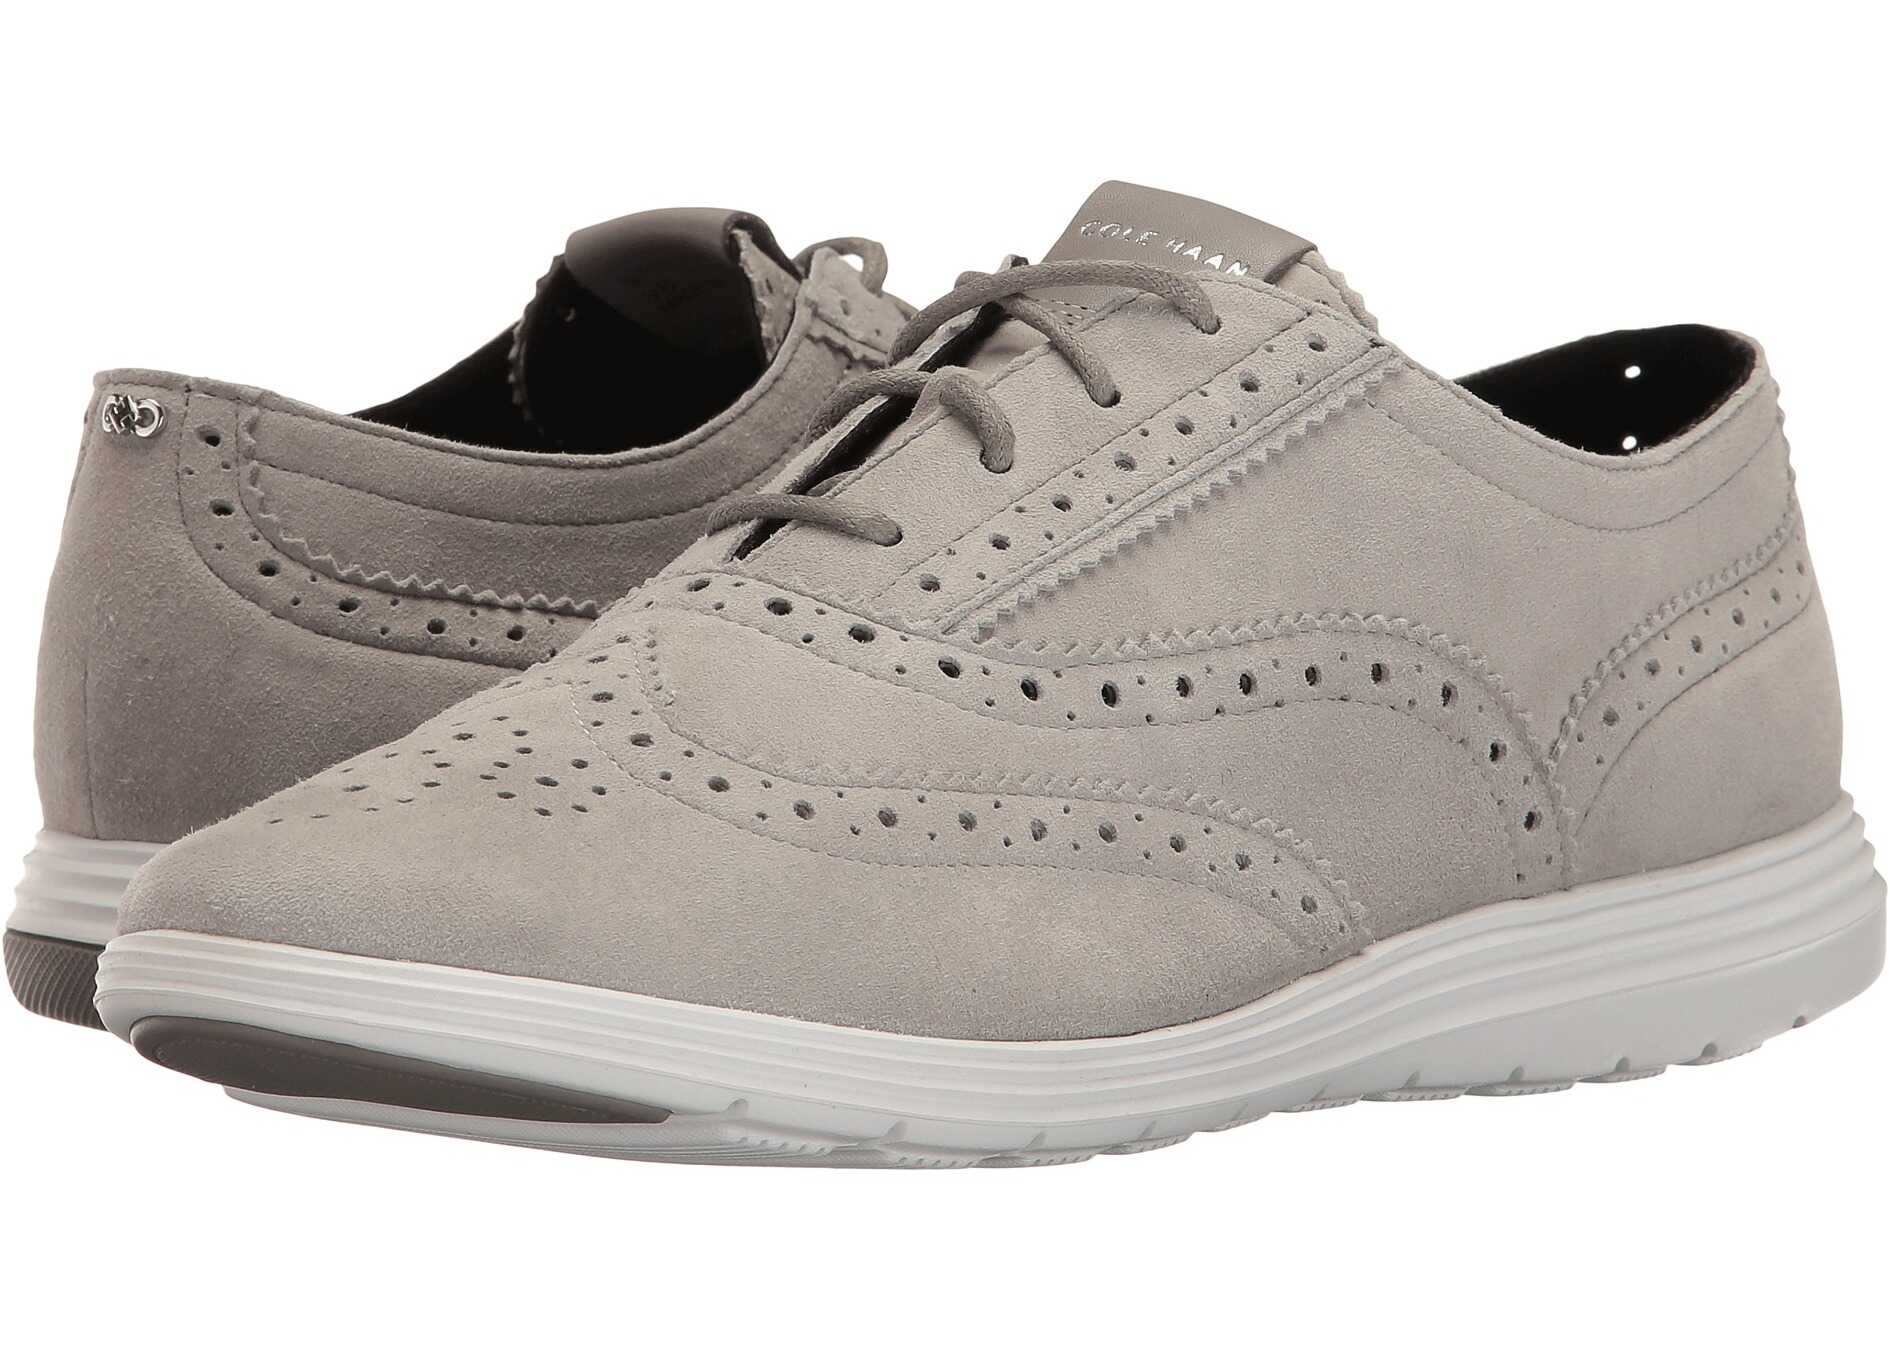 Cole Haan Grand Tour Oxford Ironstone Suede/Optic White